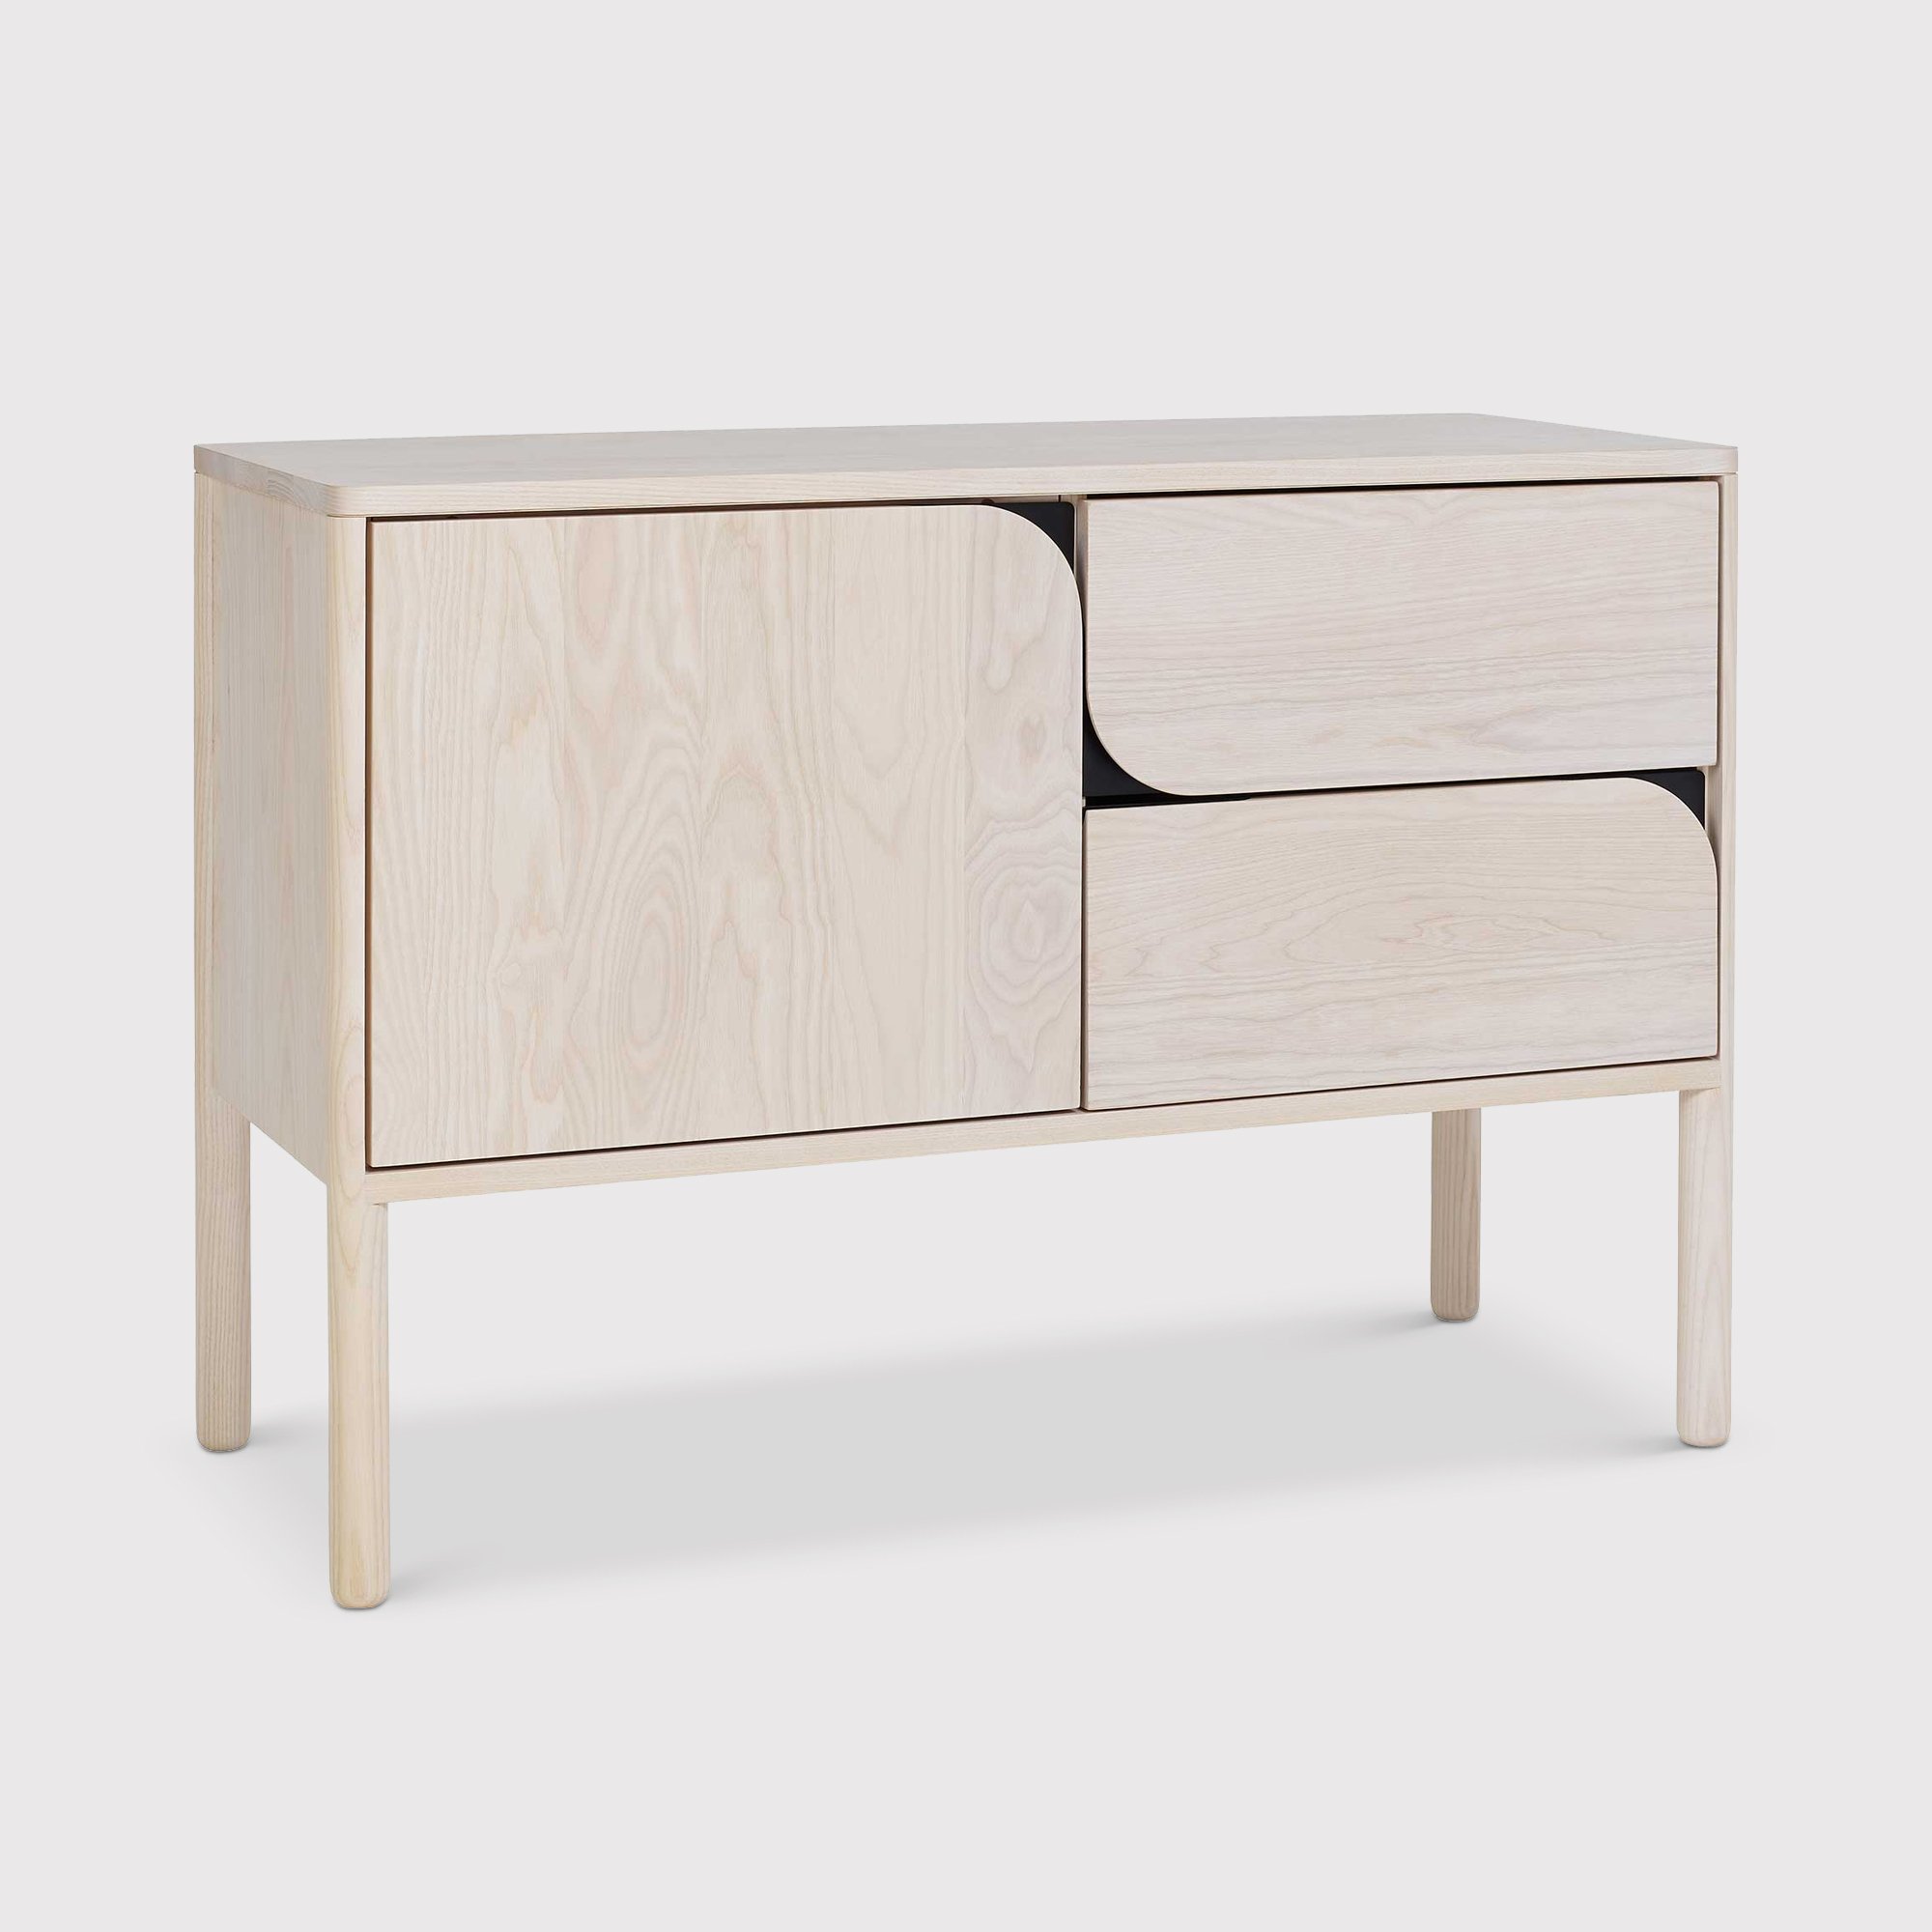 Ercol Verso Small Sideboard, Neutral | Barker & Stonehouse